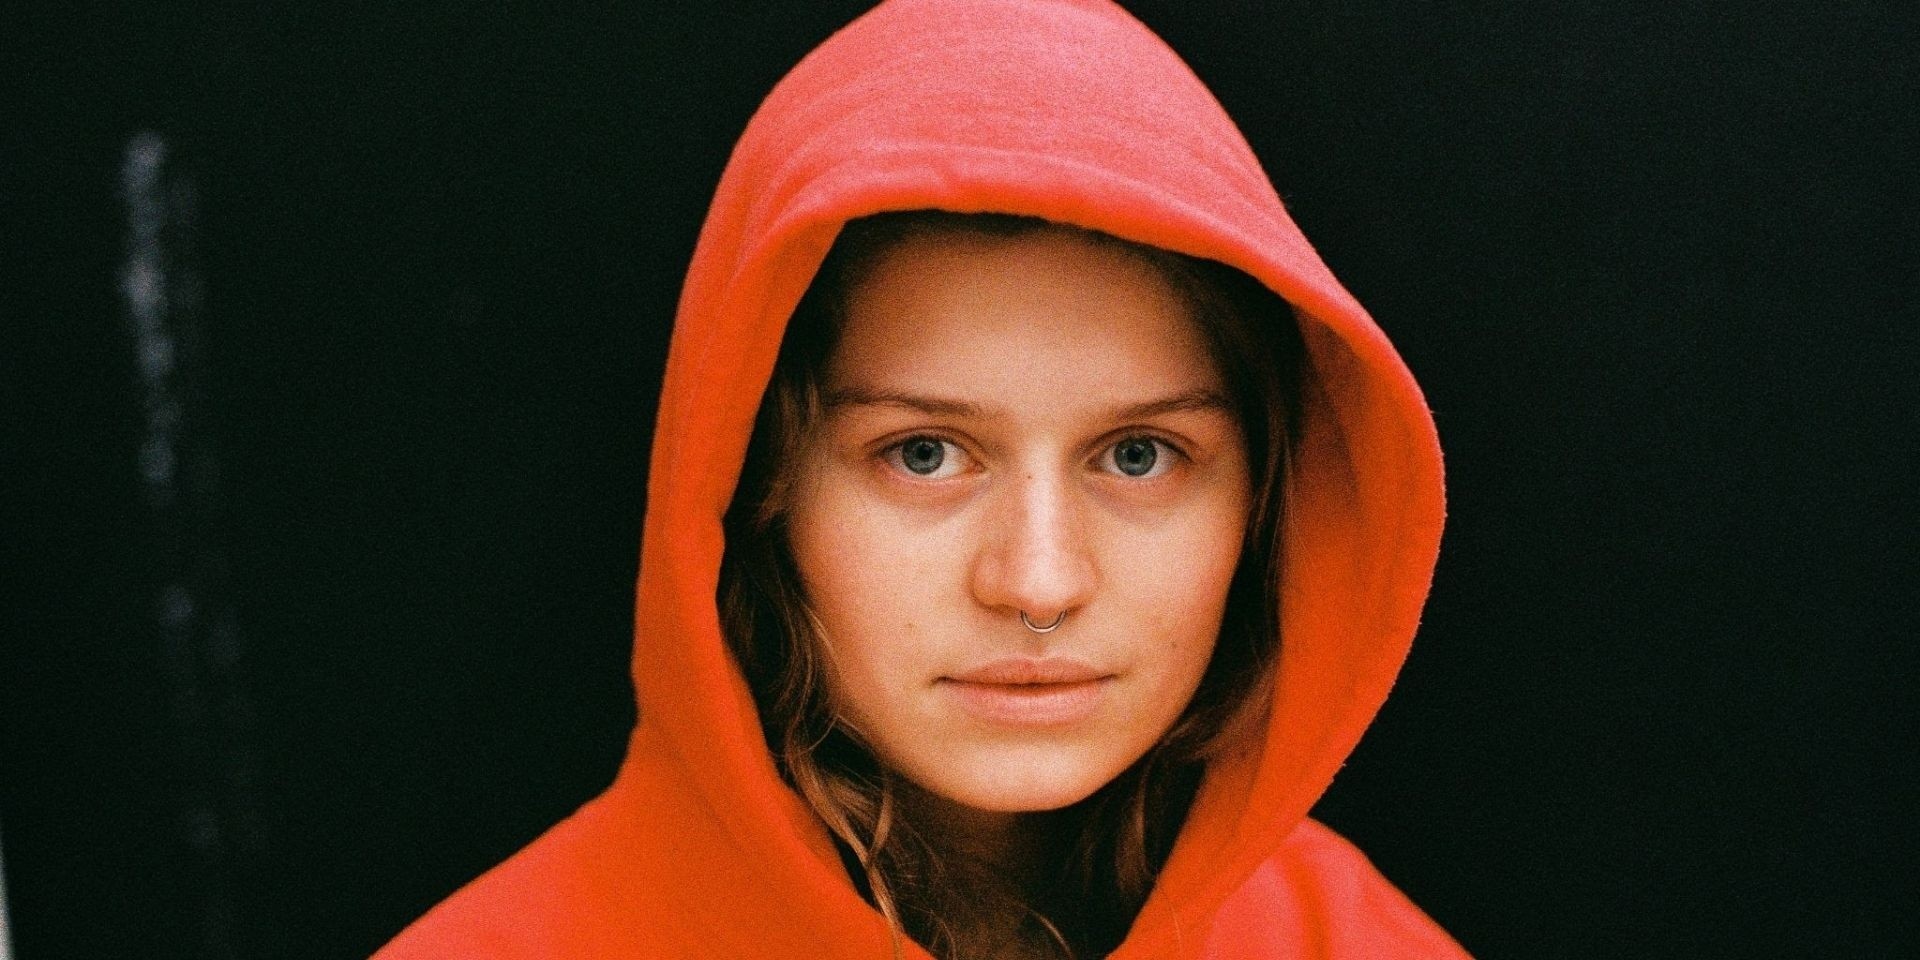 girl in red drops widely anticipated debut LP 'if i could make it go quiet', unveils music video for 'Serotonin' — listen